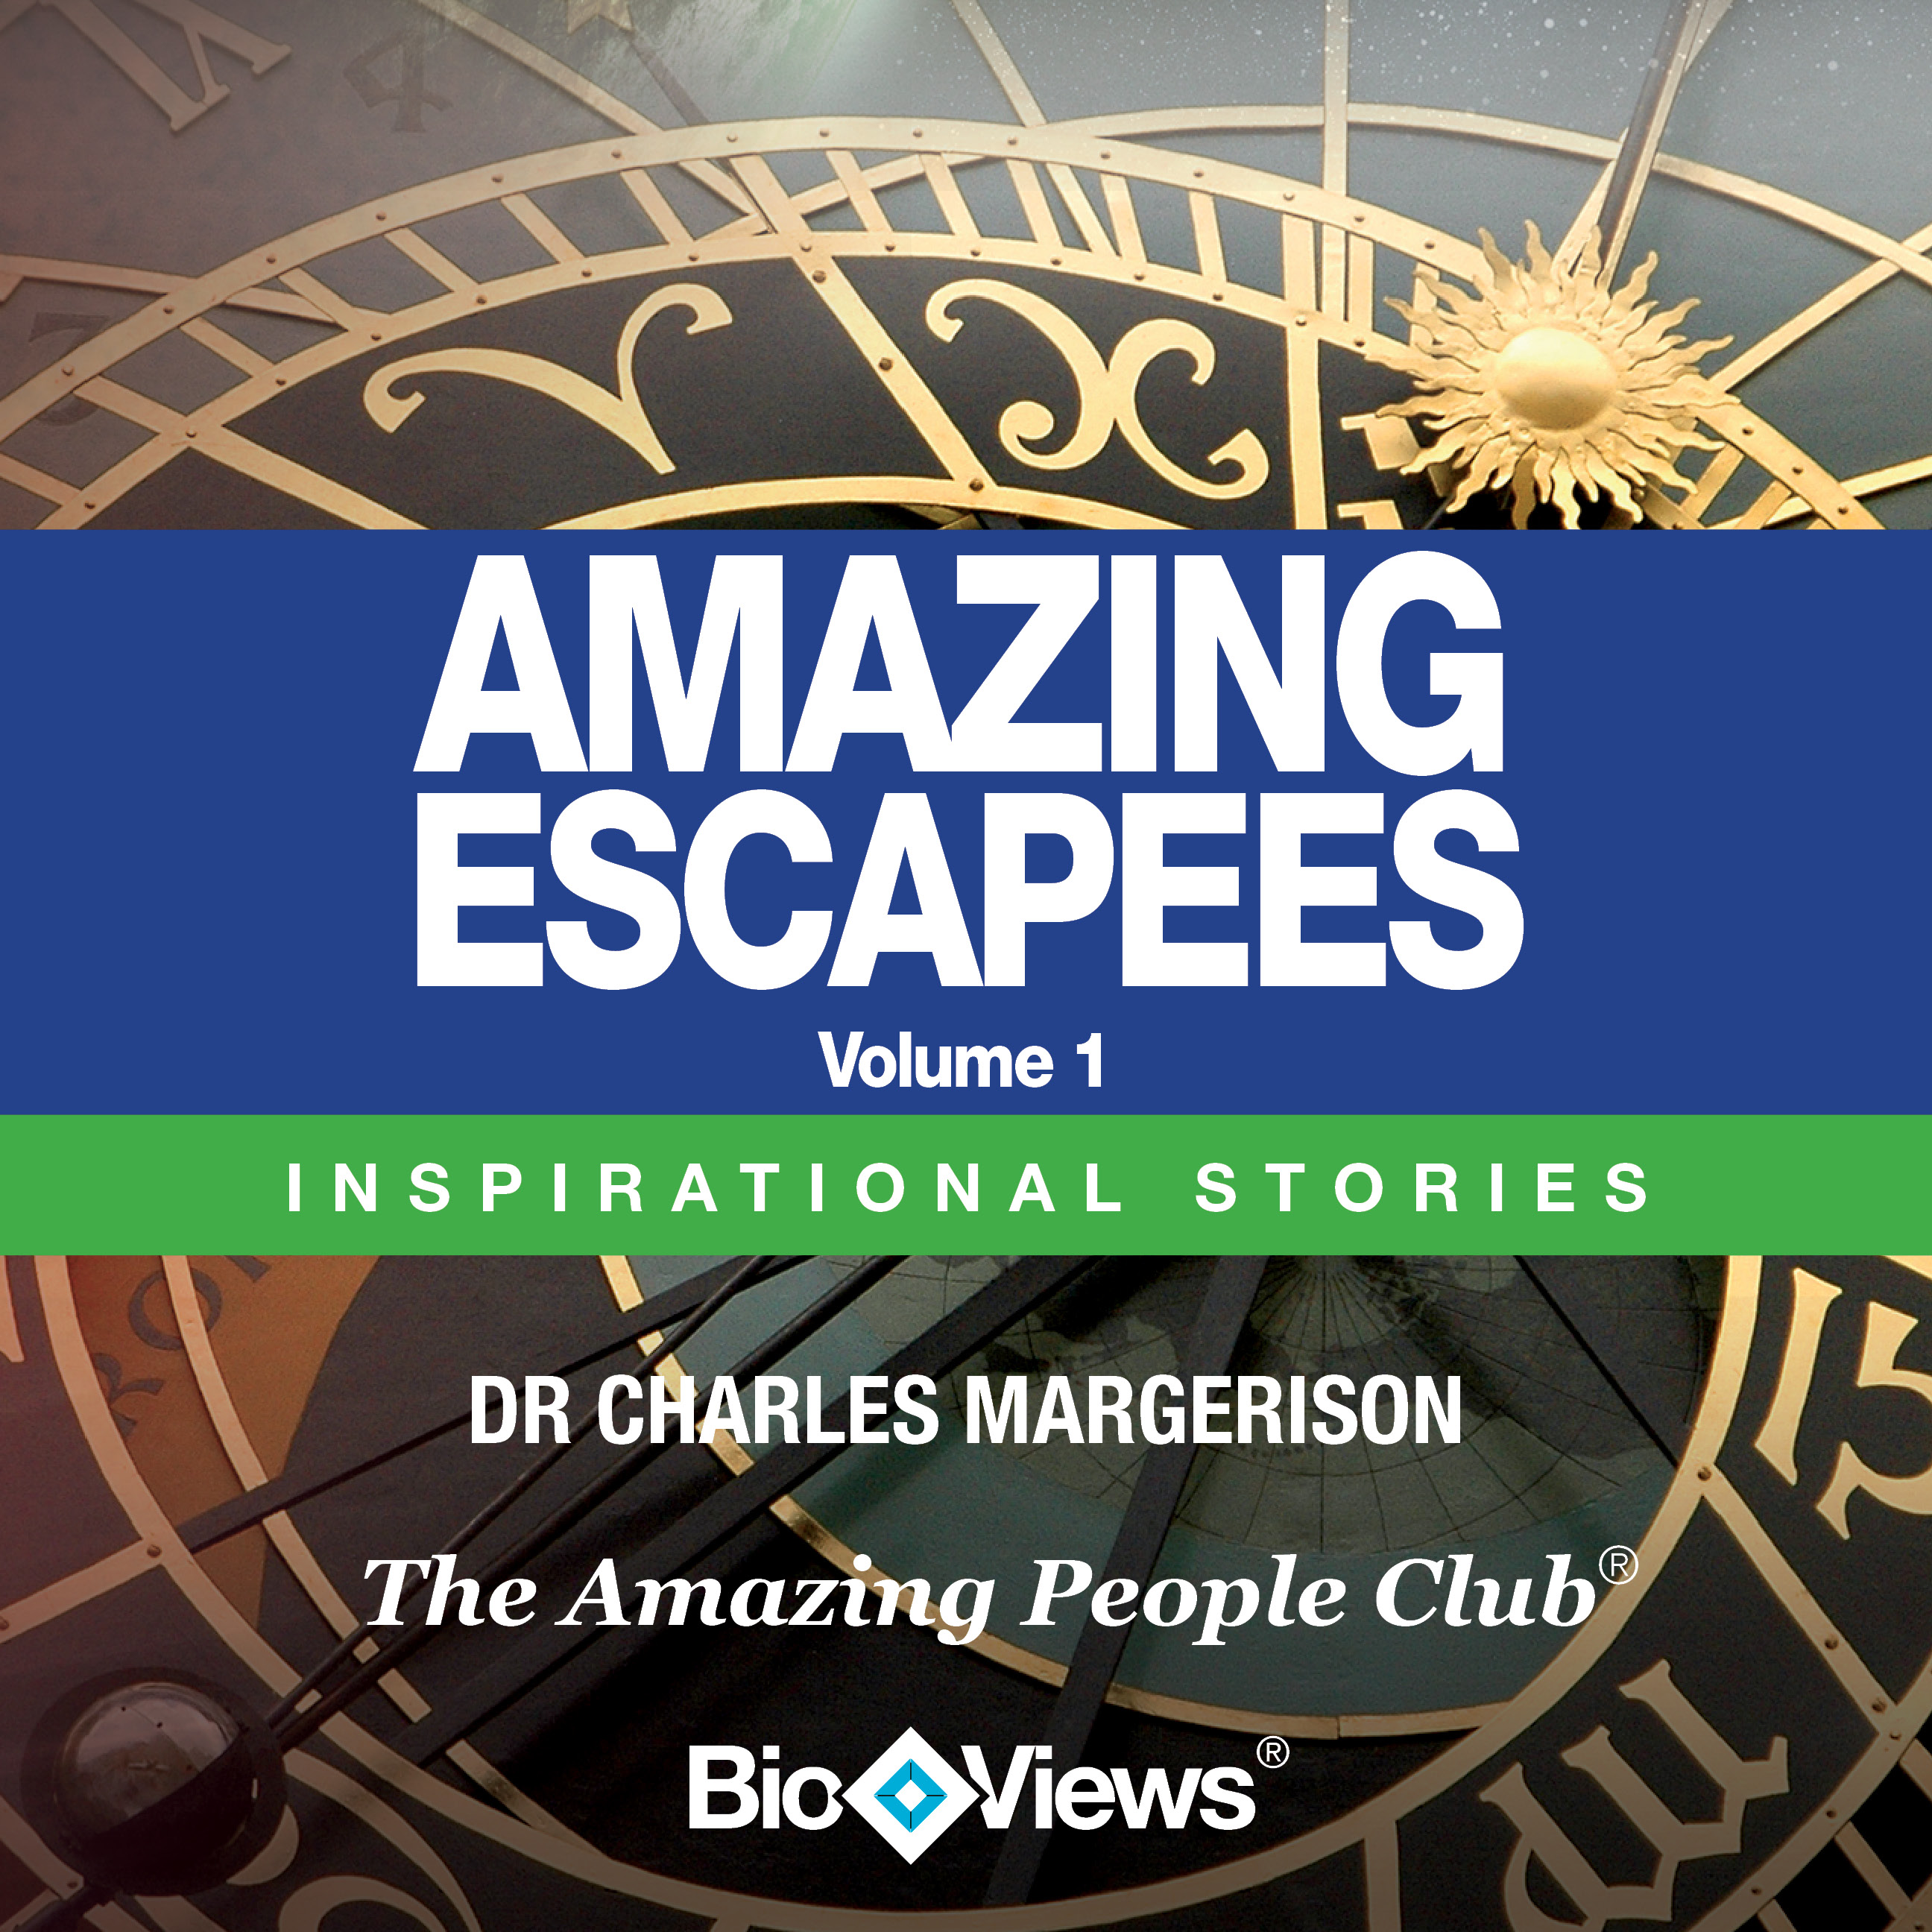 Amazing Escapees, Vol. 1: Inspirational Stories Audiobook, by Charles Margerison